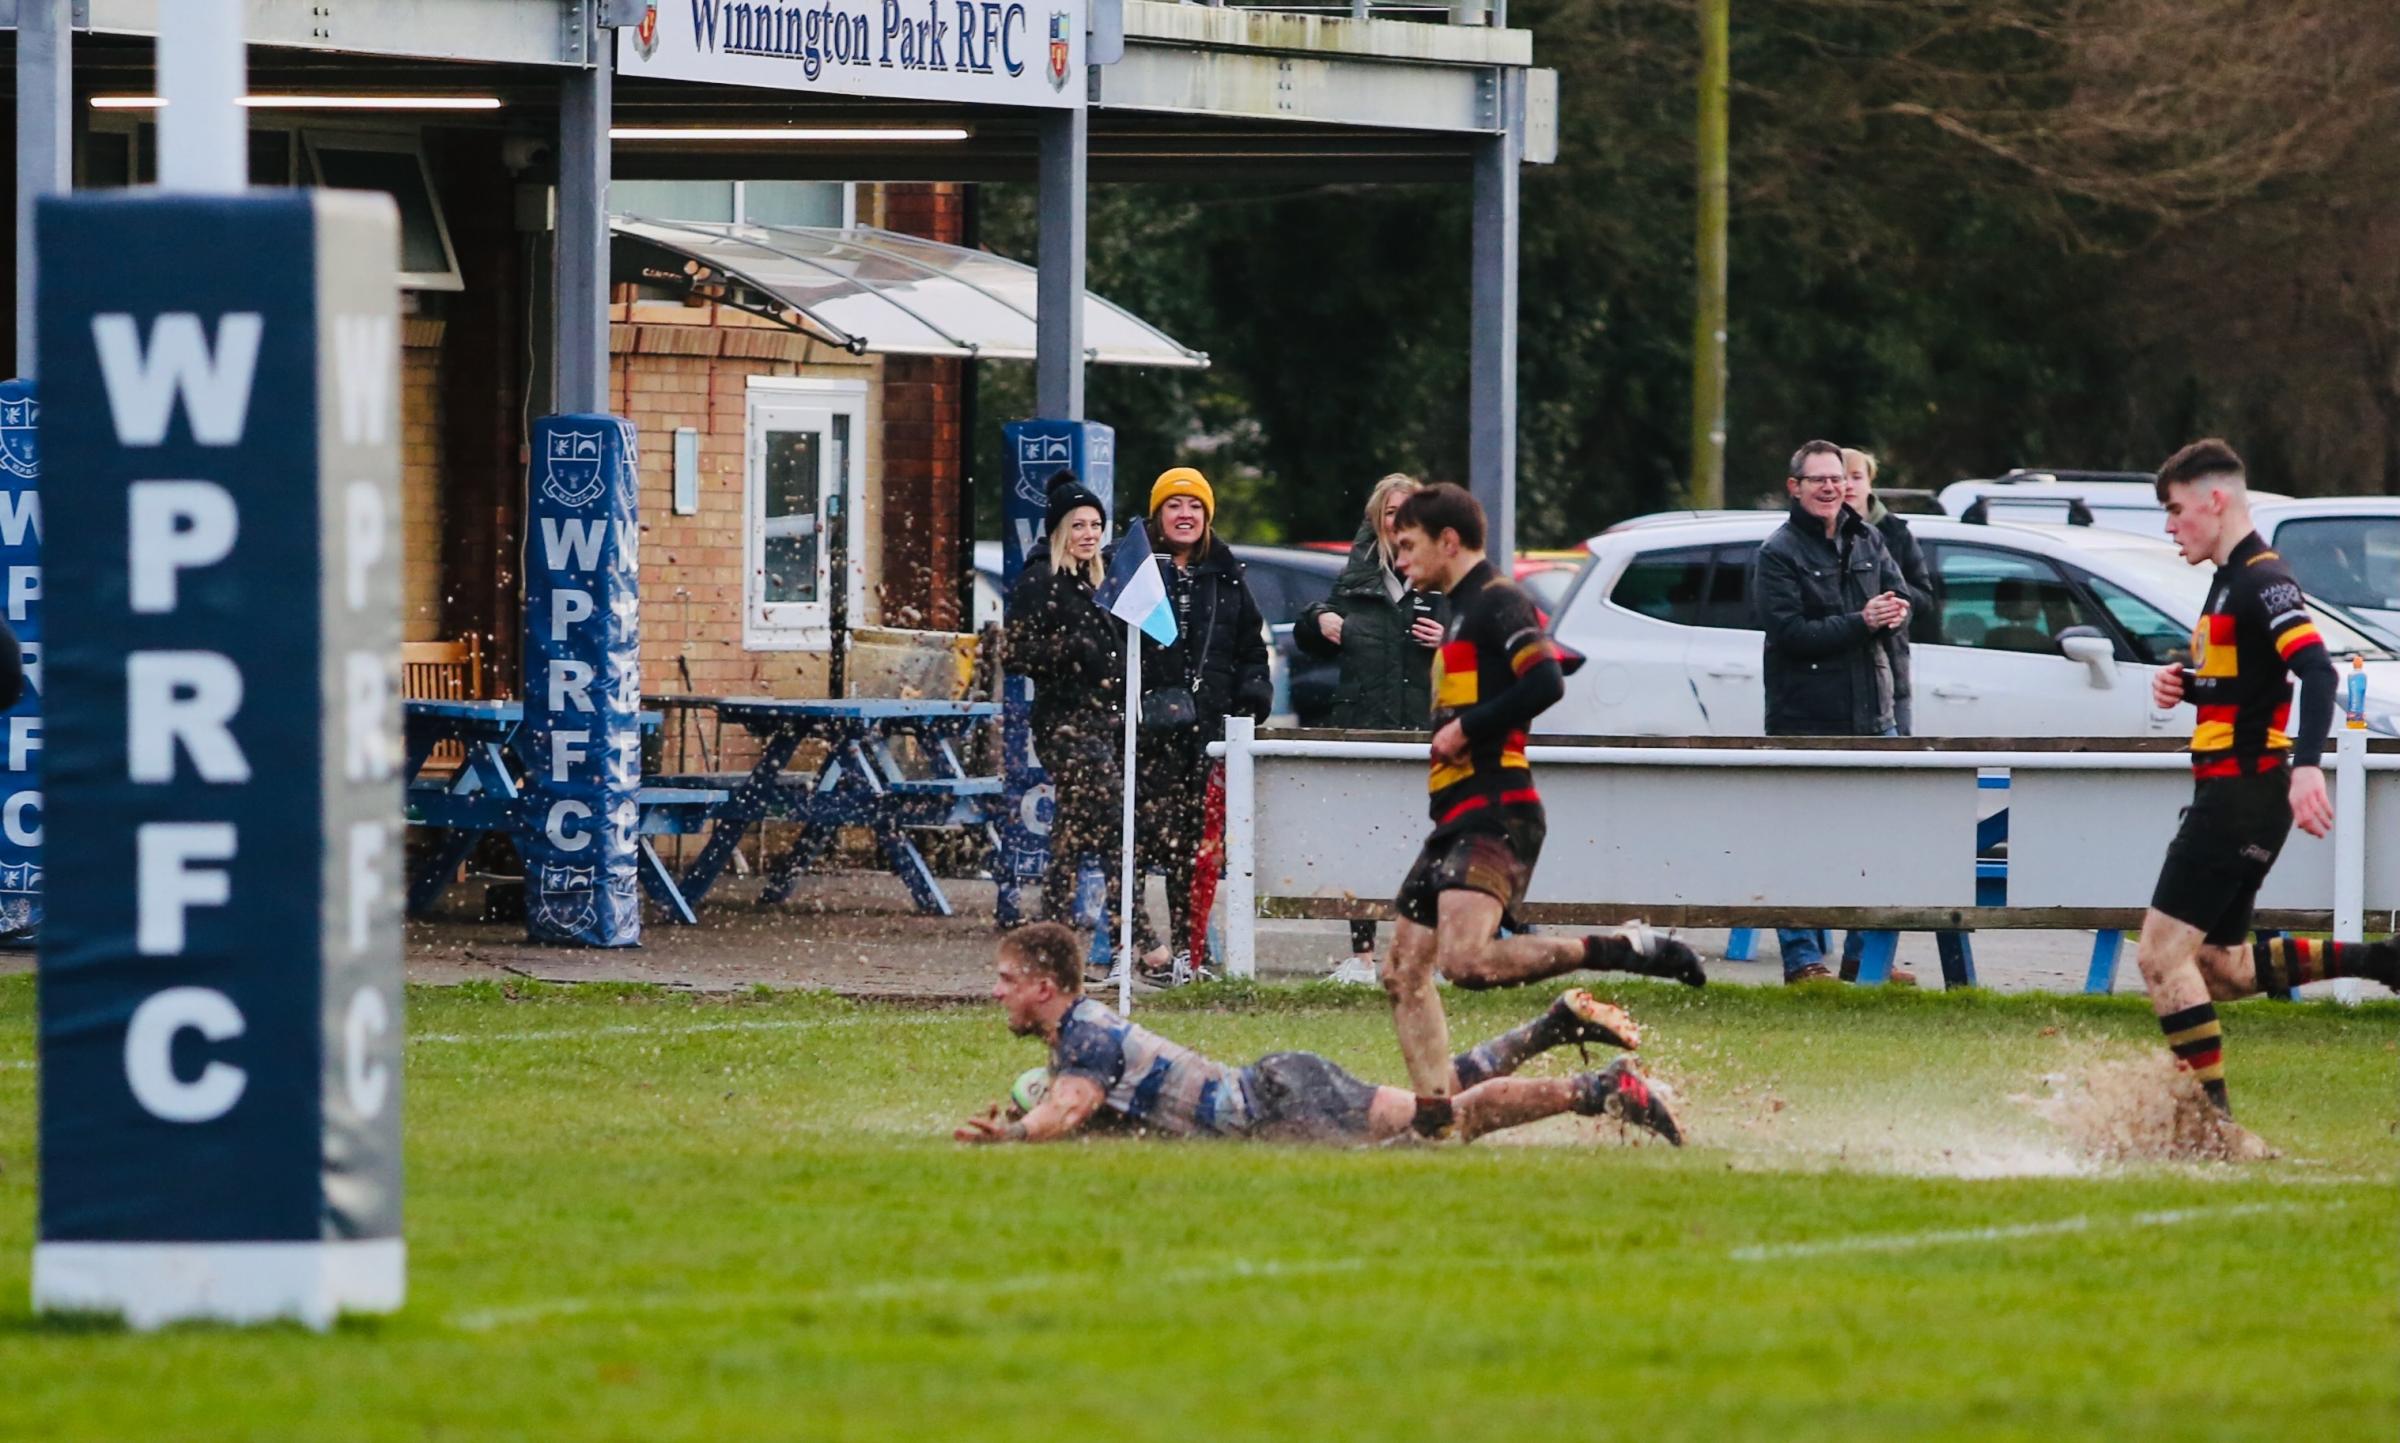 Winnington Park RFC beat Southport in first game of 2022 Northwich Guardian